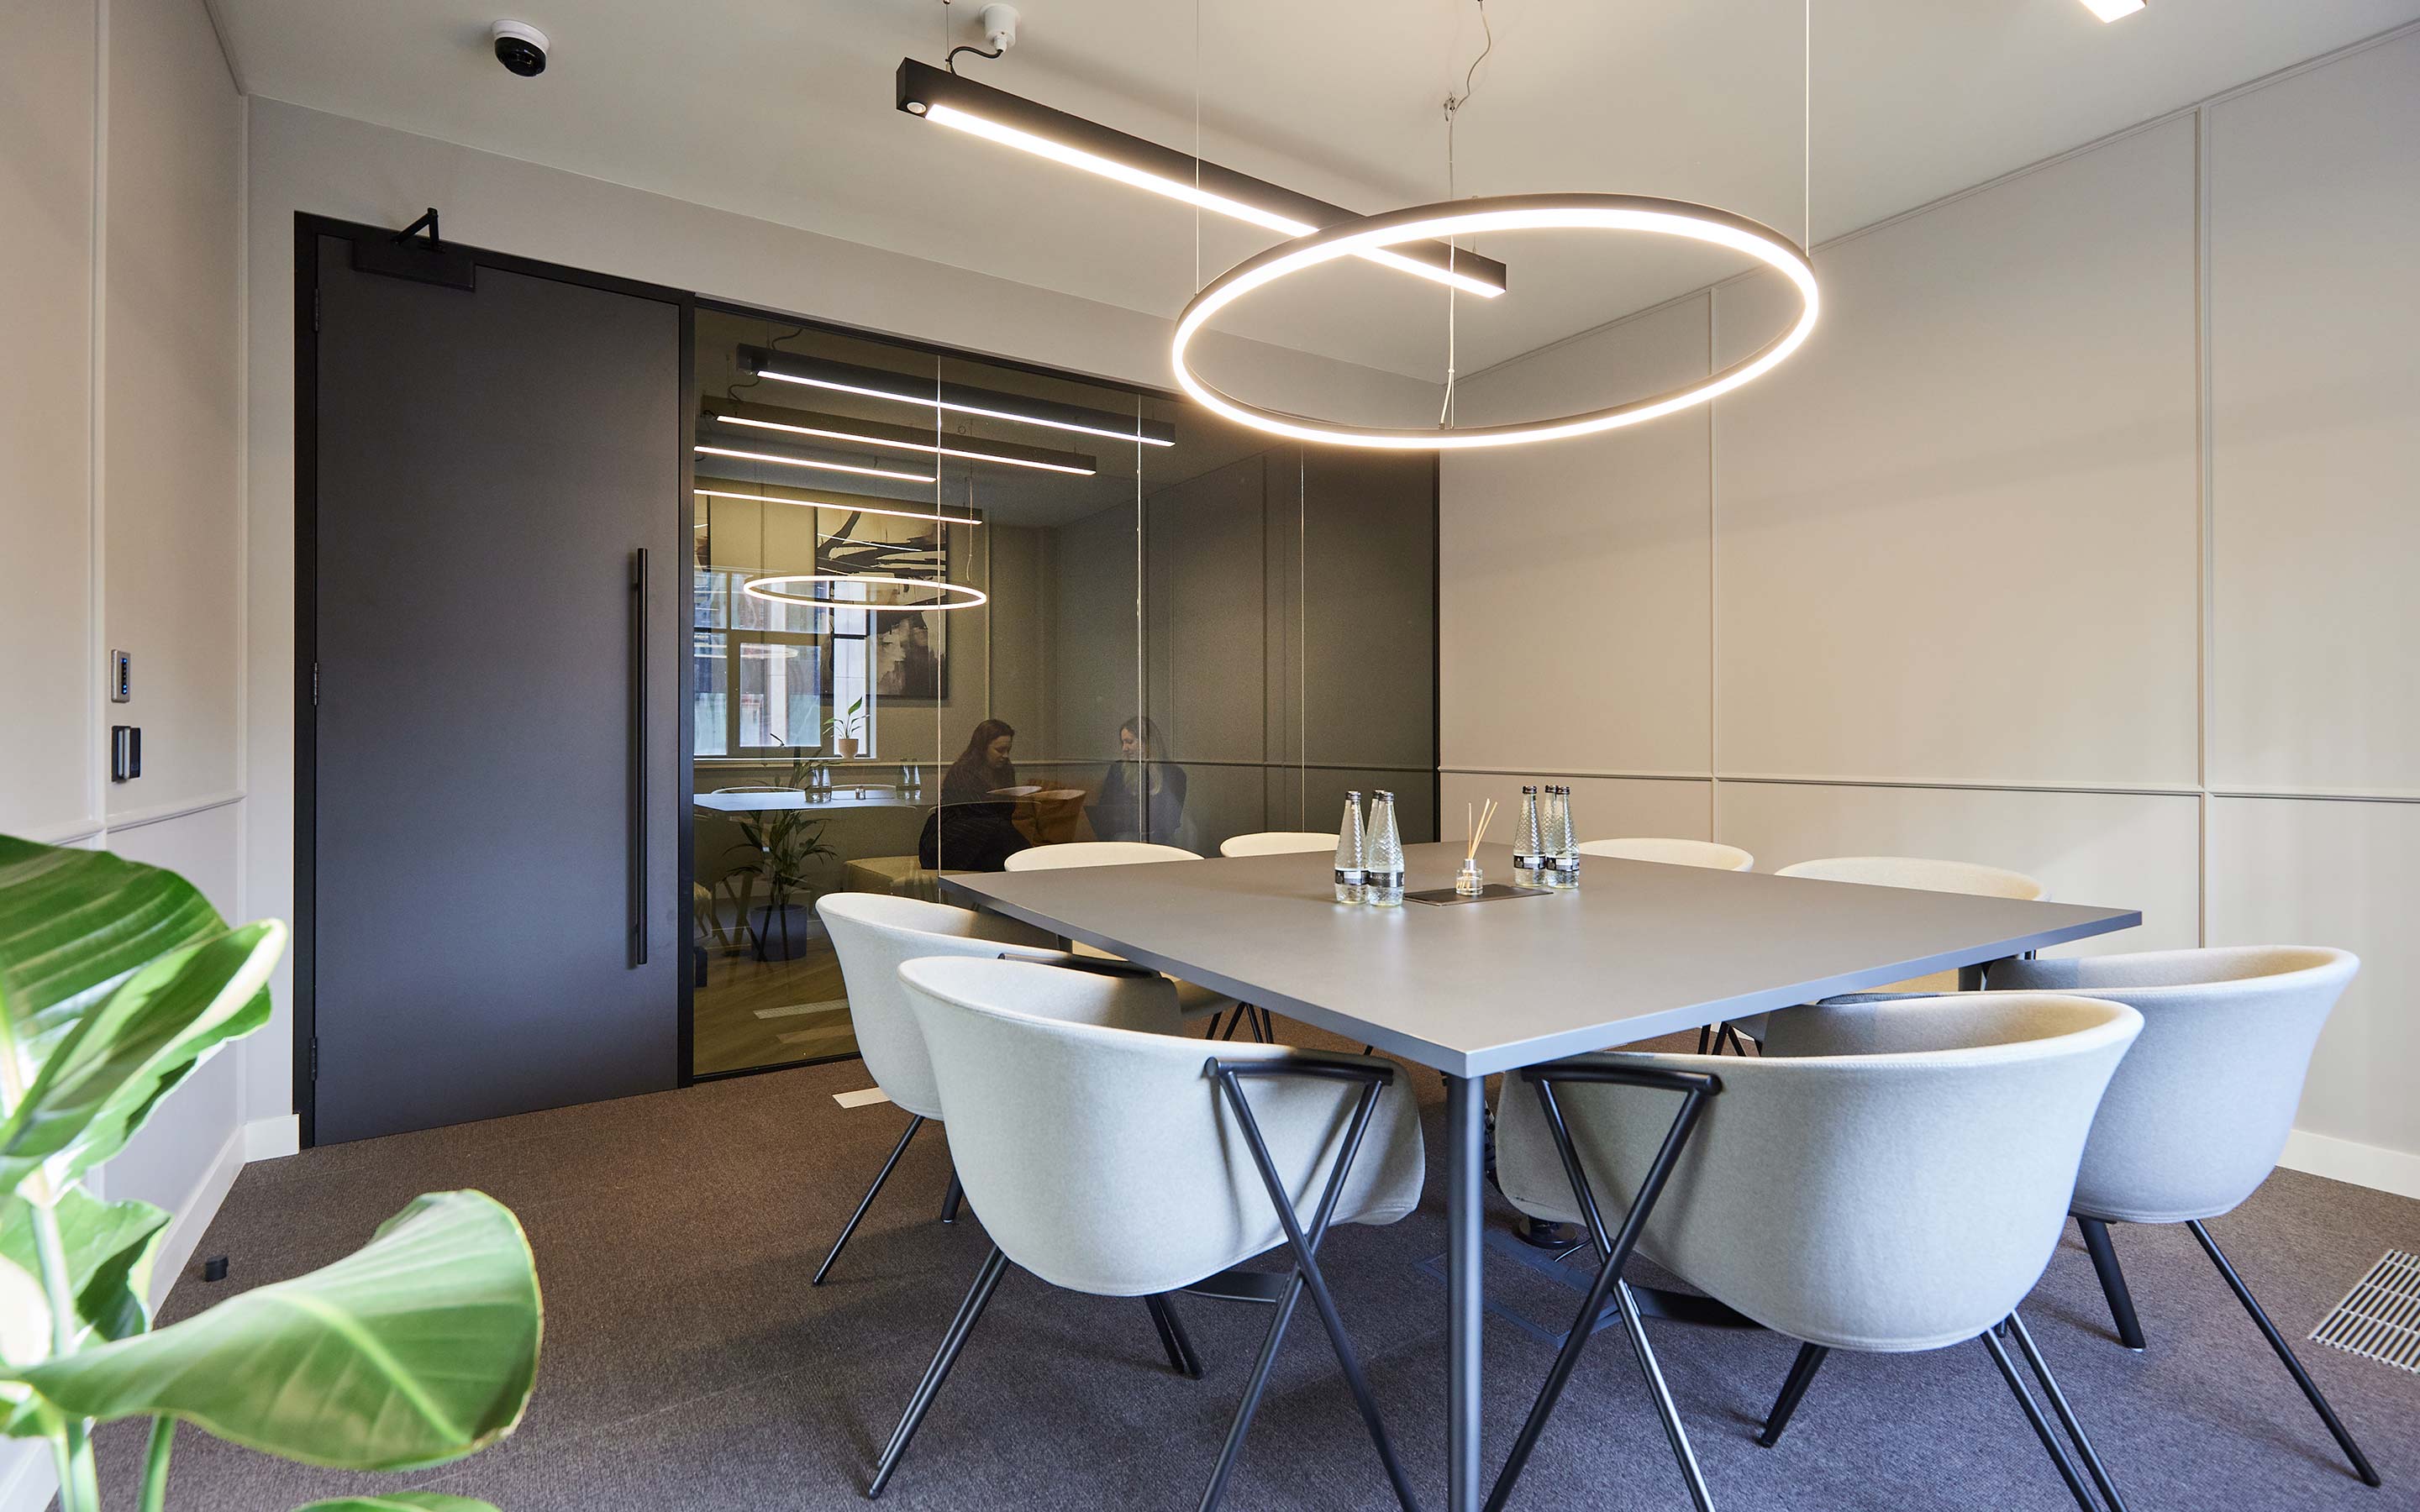 Sleek conference room in a London office interior design featuring smoky privacy glass and grey upholstered chairs